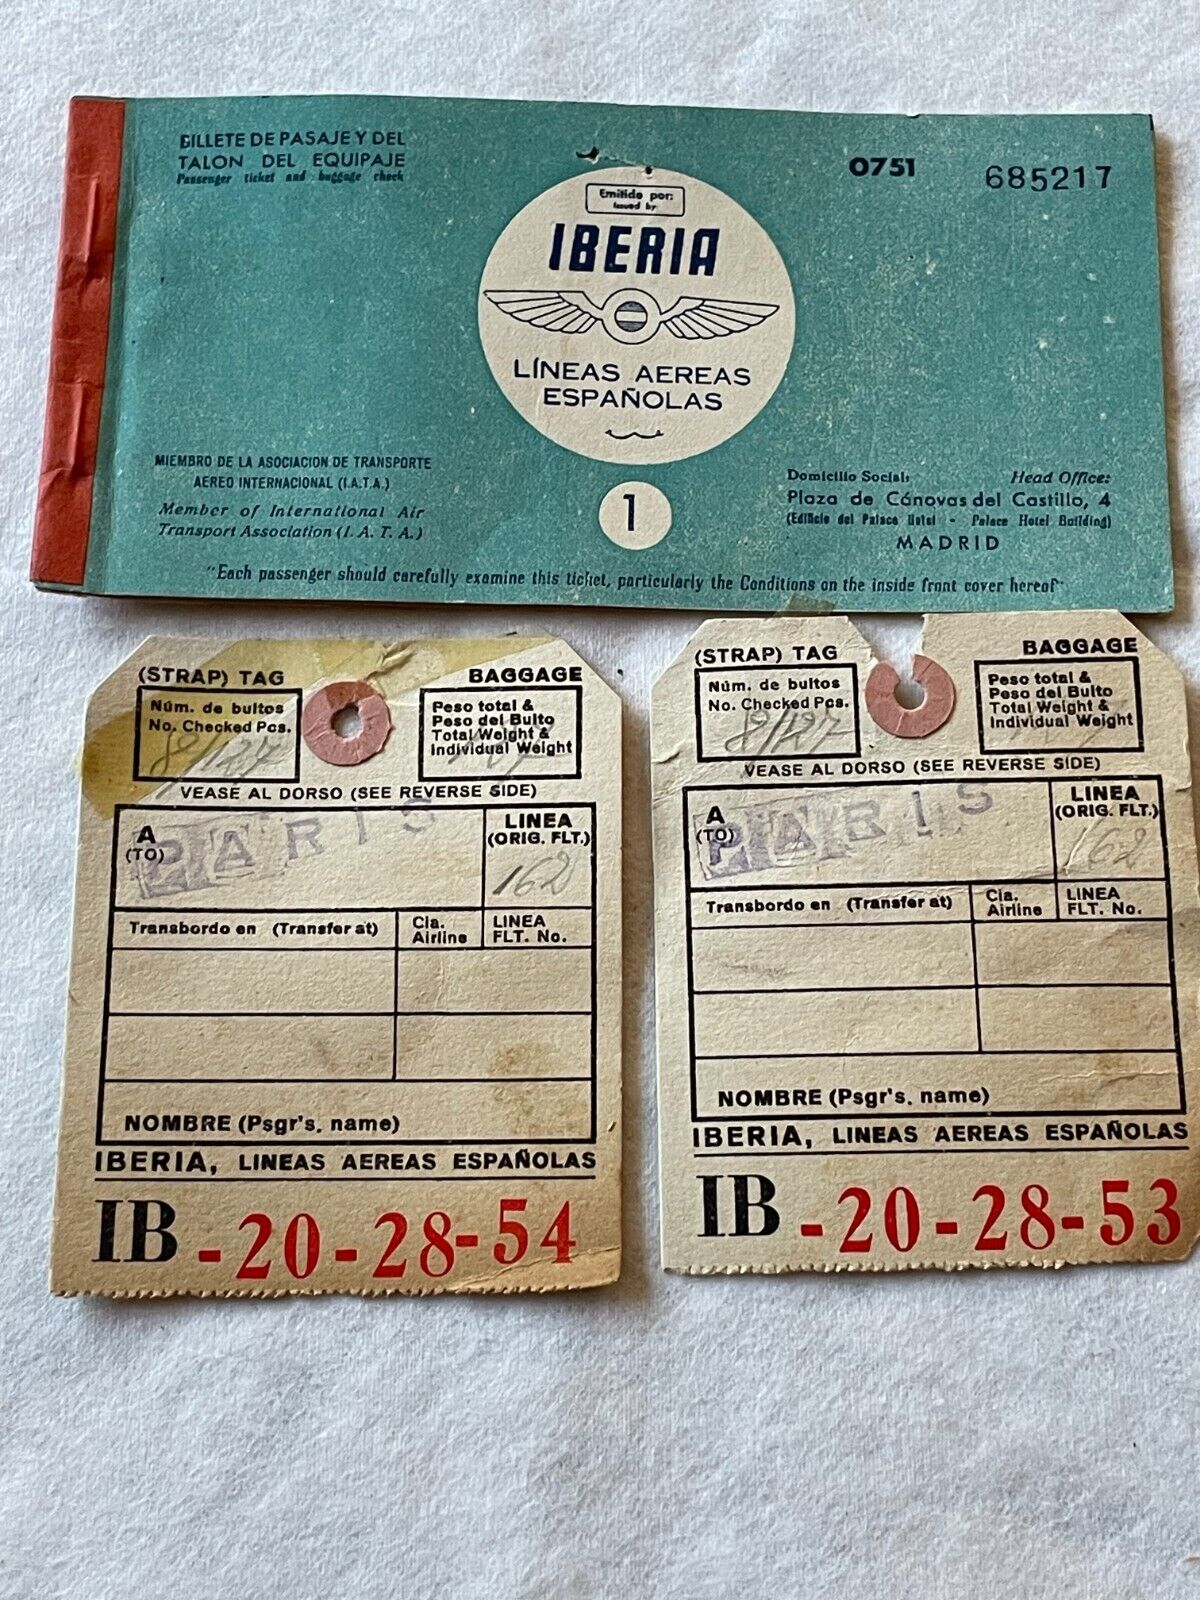 VINTAGE 1952 IBERIA AIRLINES OF SPAIN AIRLINE TICKET BOOKLET & 2 BAGGAGE TAGS